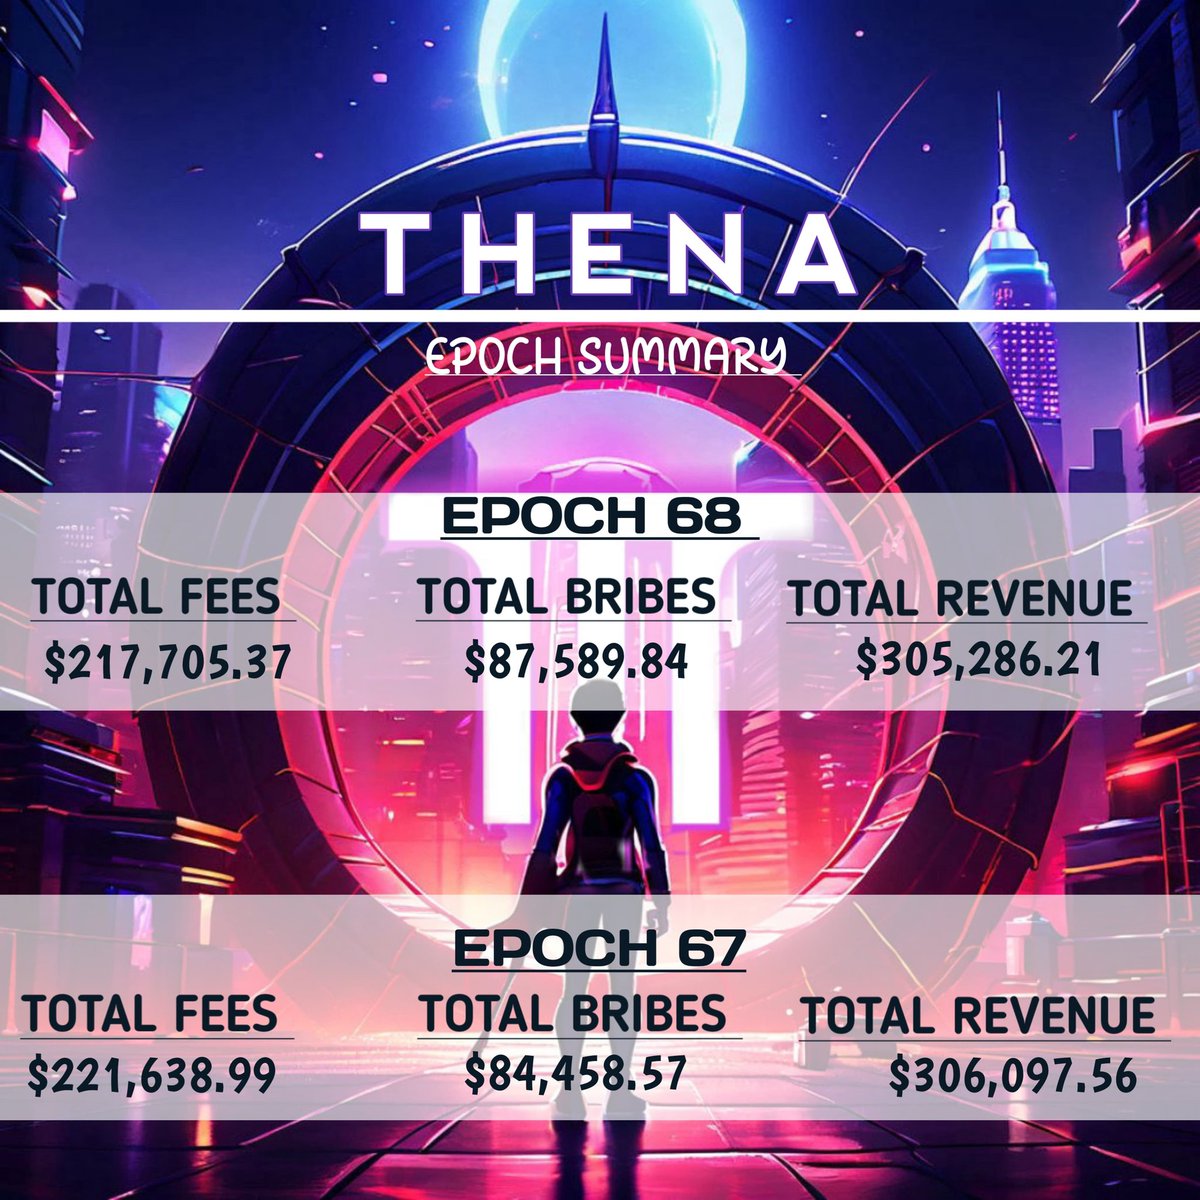 Summary of @thenafi_ Epoch 68:
       
💰 Fees:        $217,705.37
💰 Bribes:     $87,589.84
💰 Revenue : $305,286.21

💫Another great epoch for thenians.